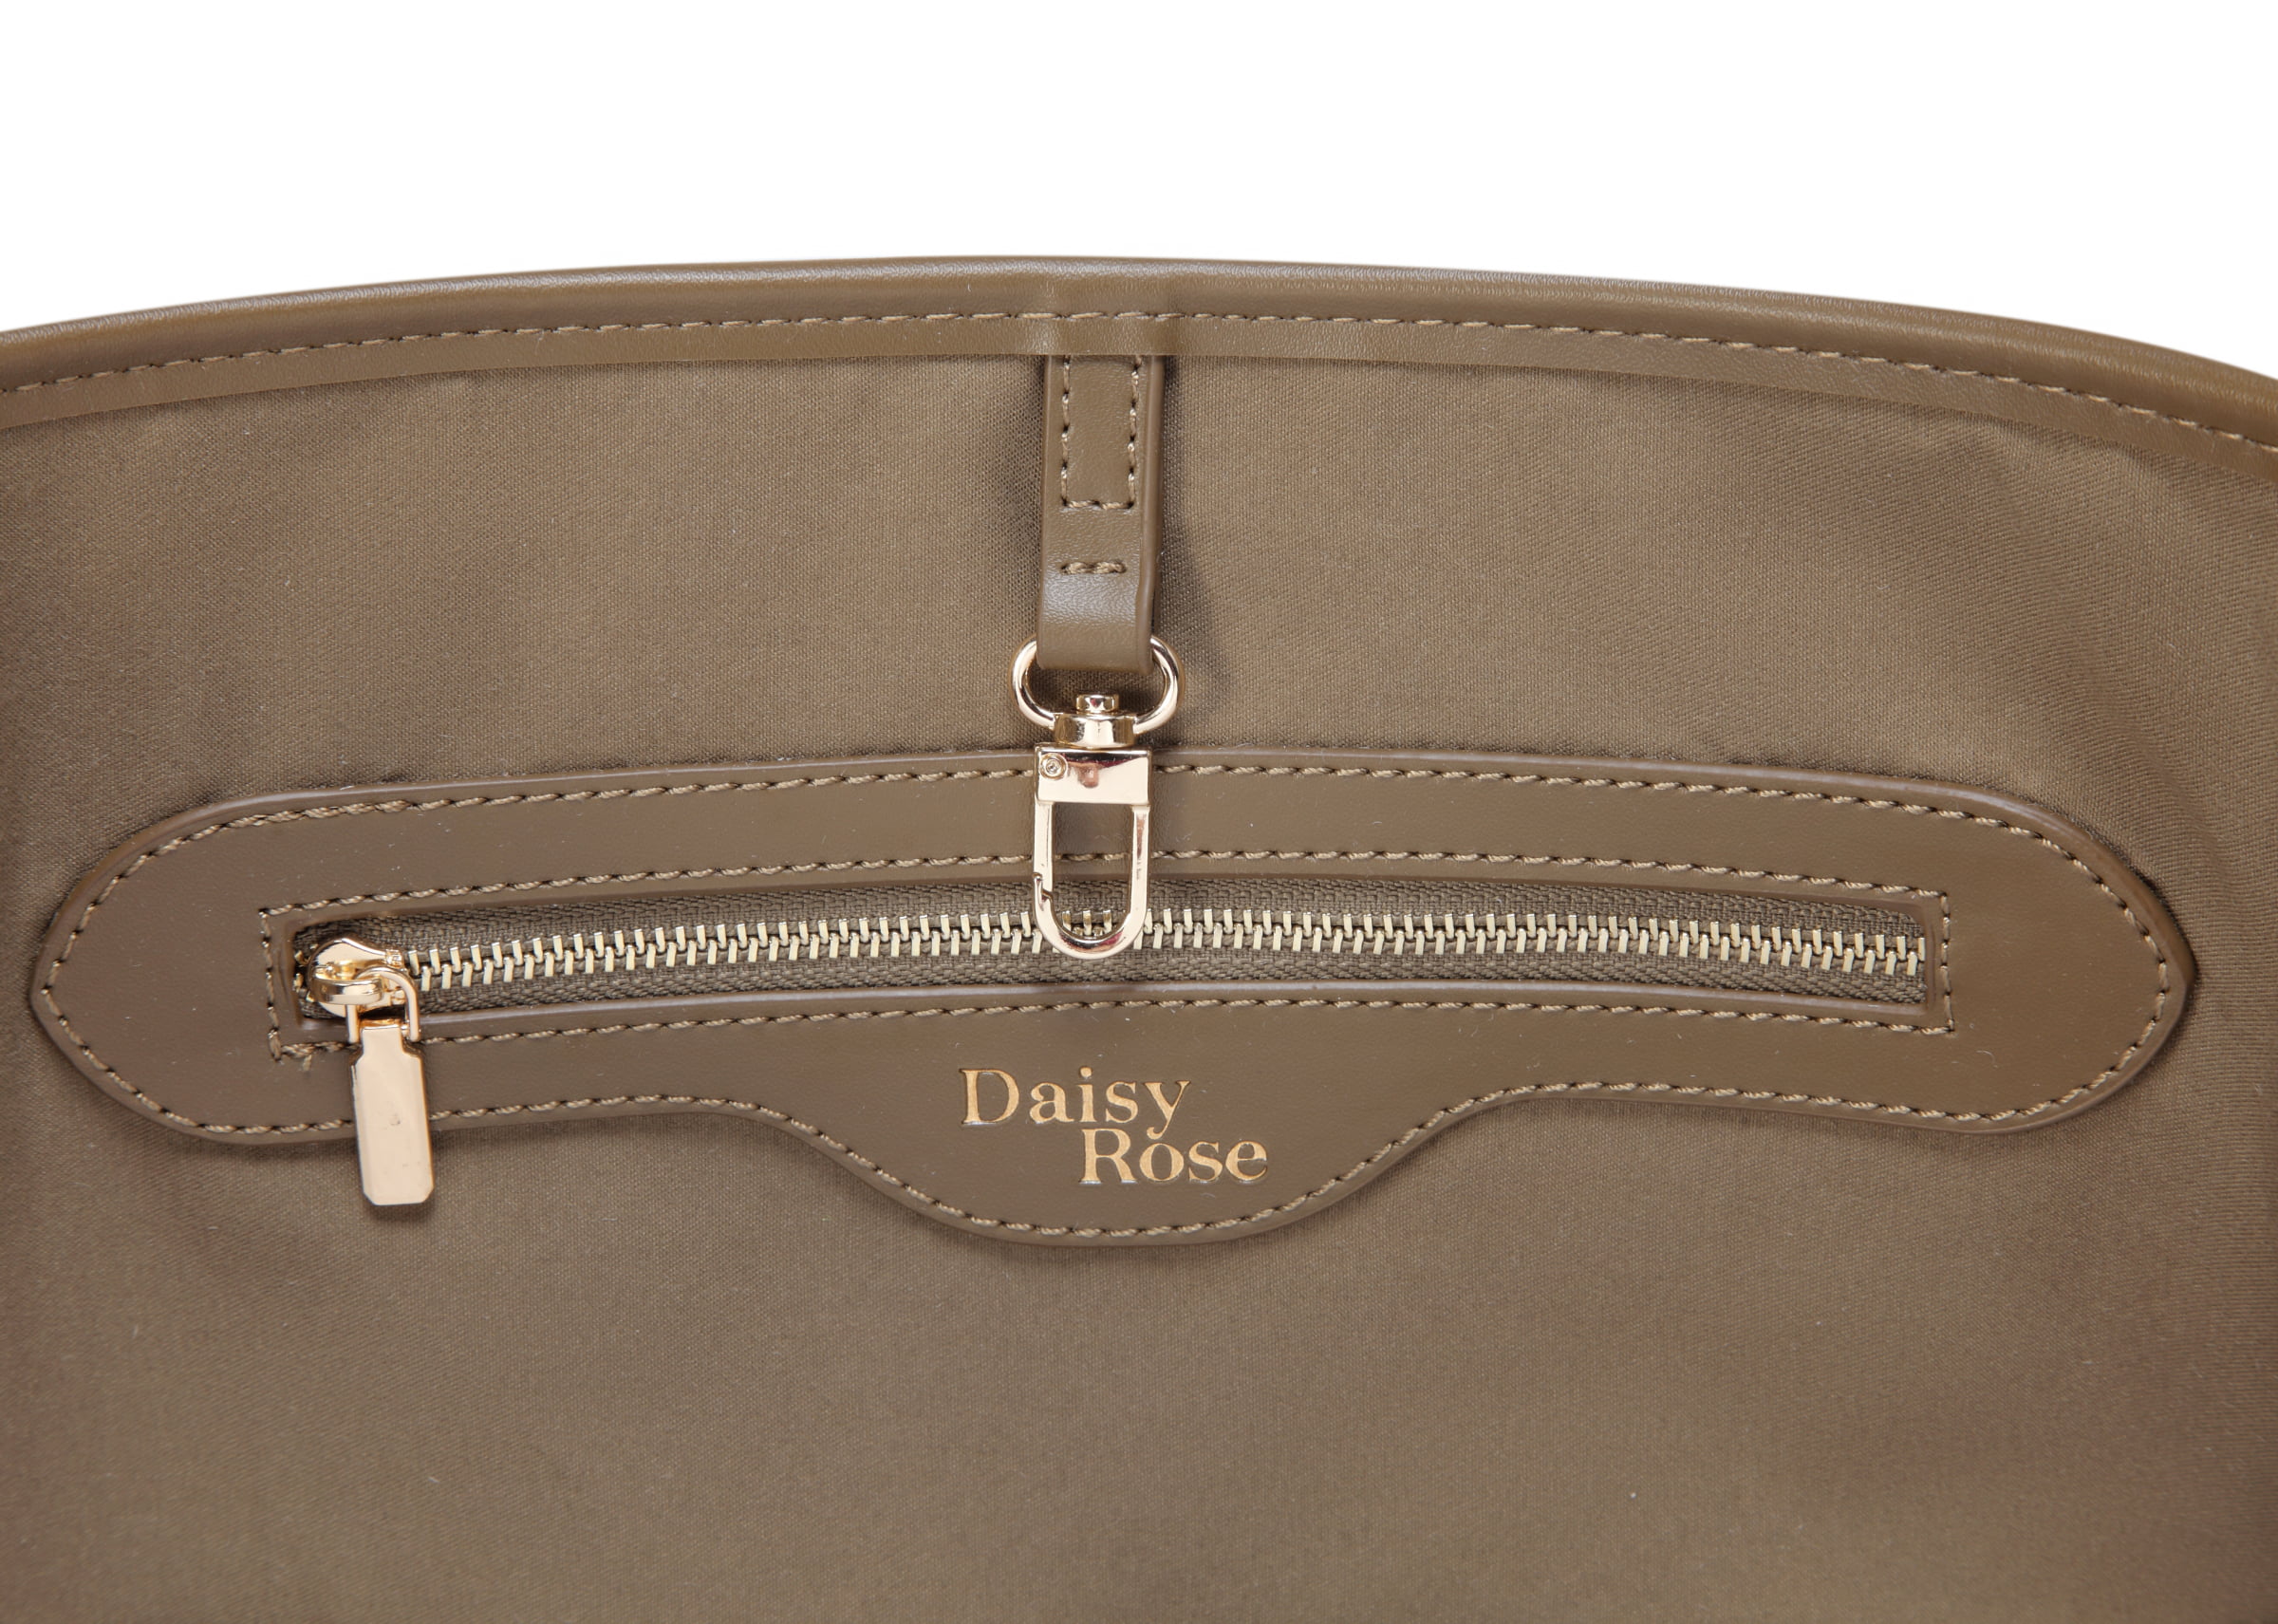 Daisy Rose Tote Shoulder Bag and Matching Clutch for Women - PU Vegan  Leather Handbag for Travel Work and School - Olive Check